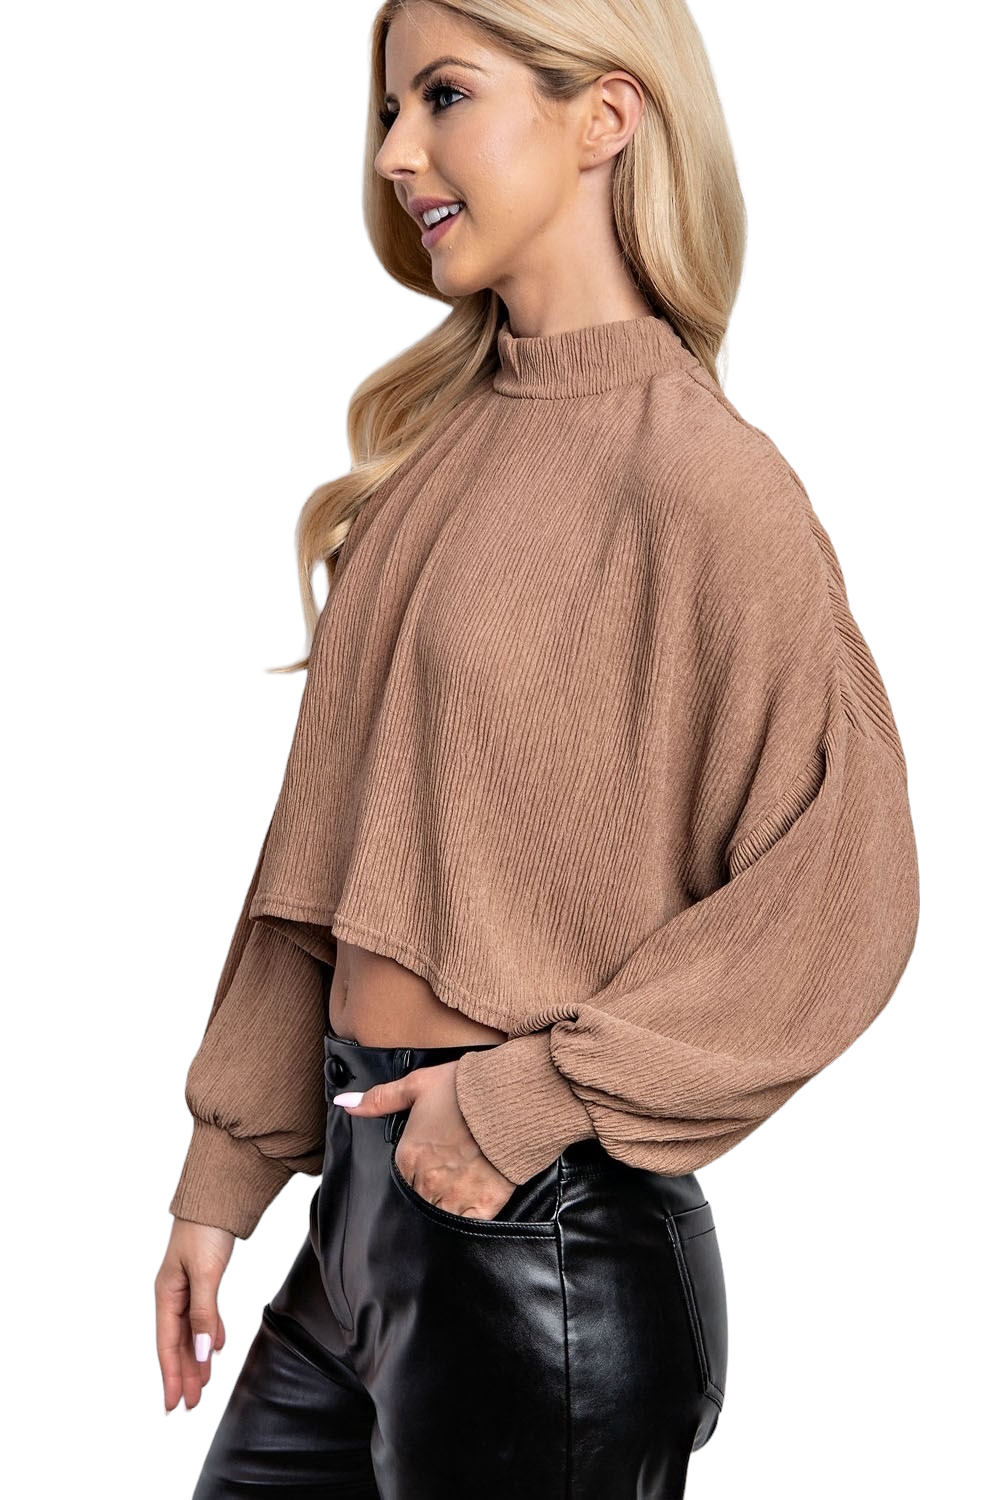 Loving Arms Top-TAUPE